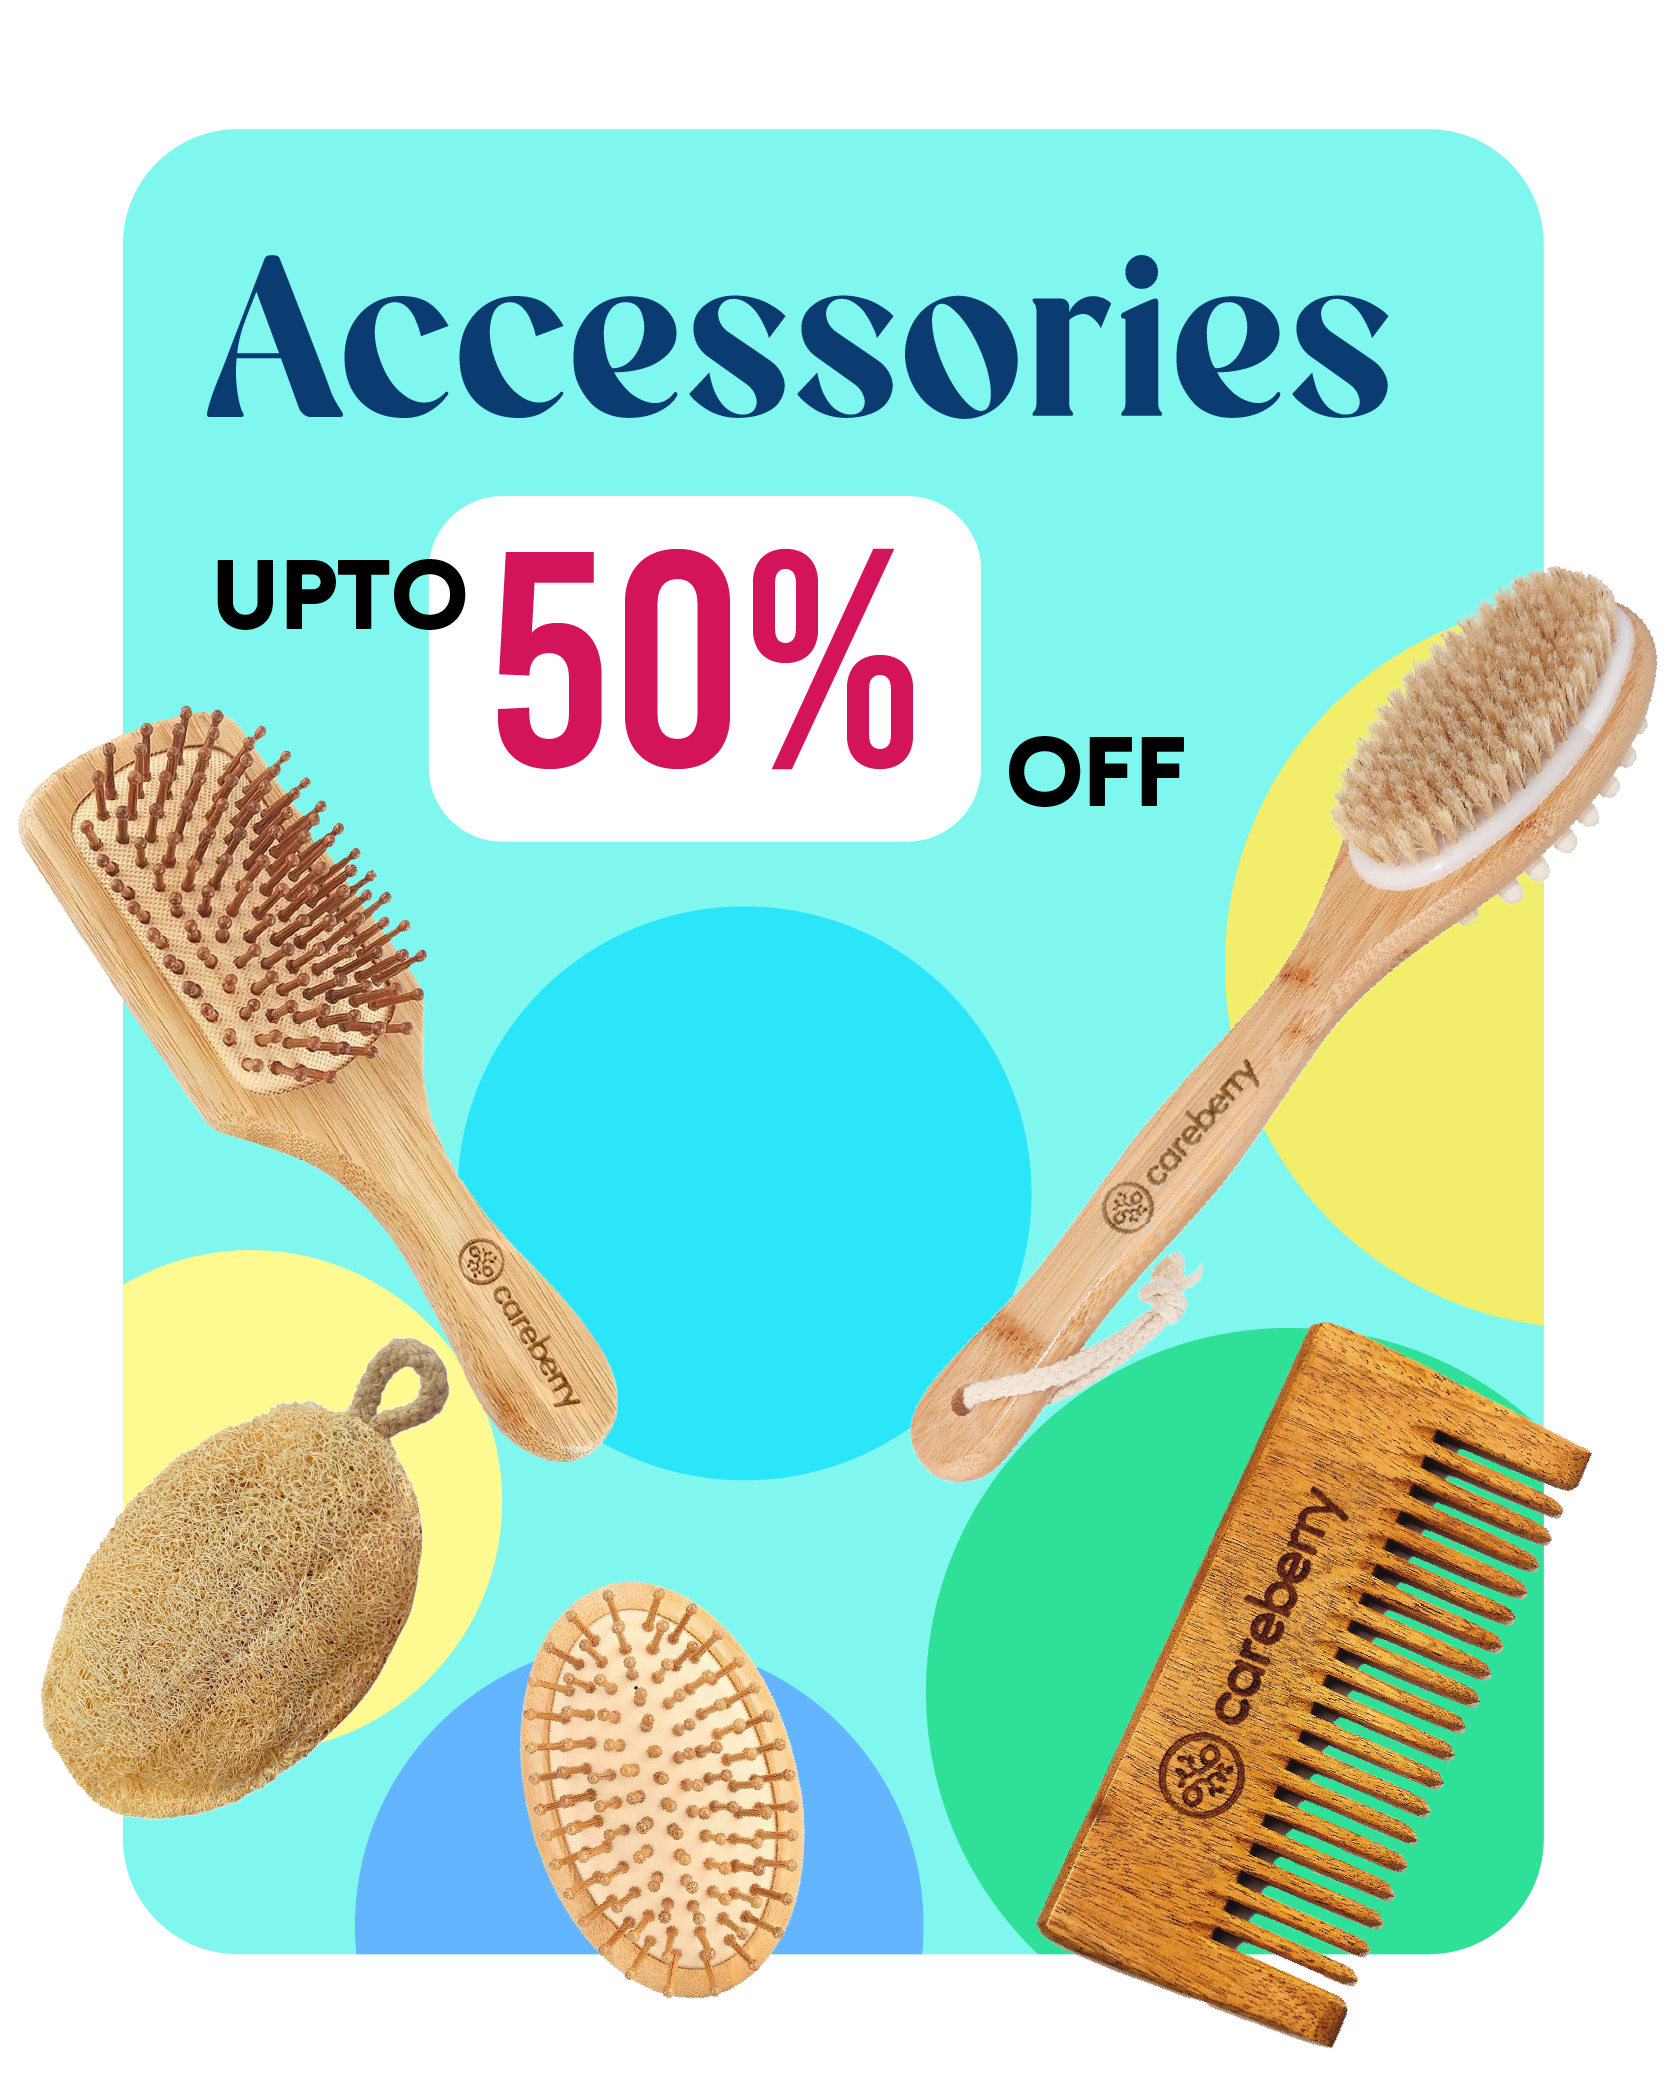 50% off on all accessories